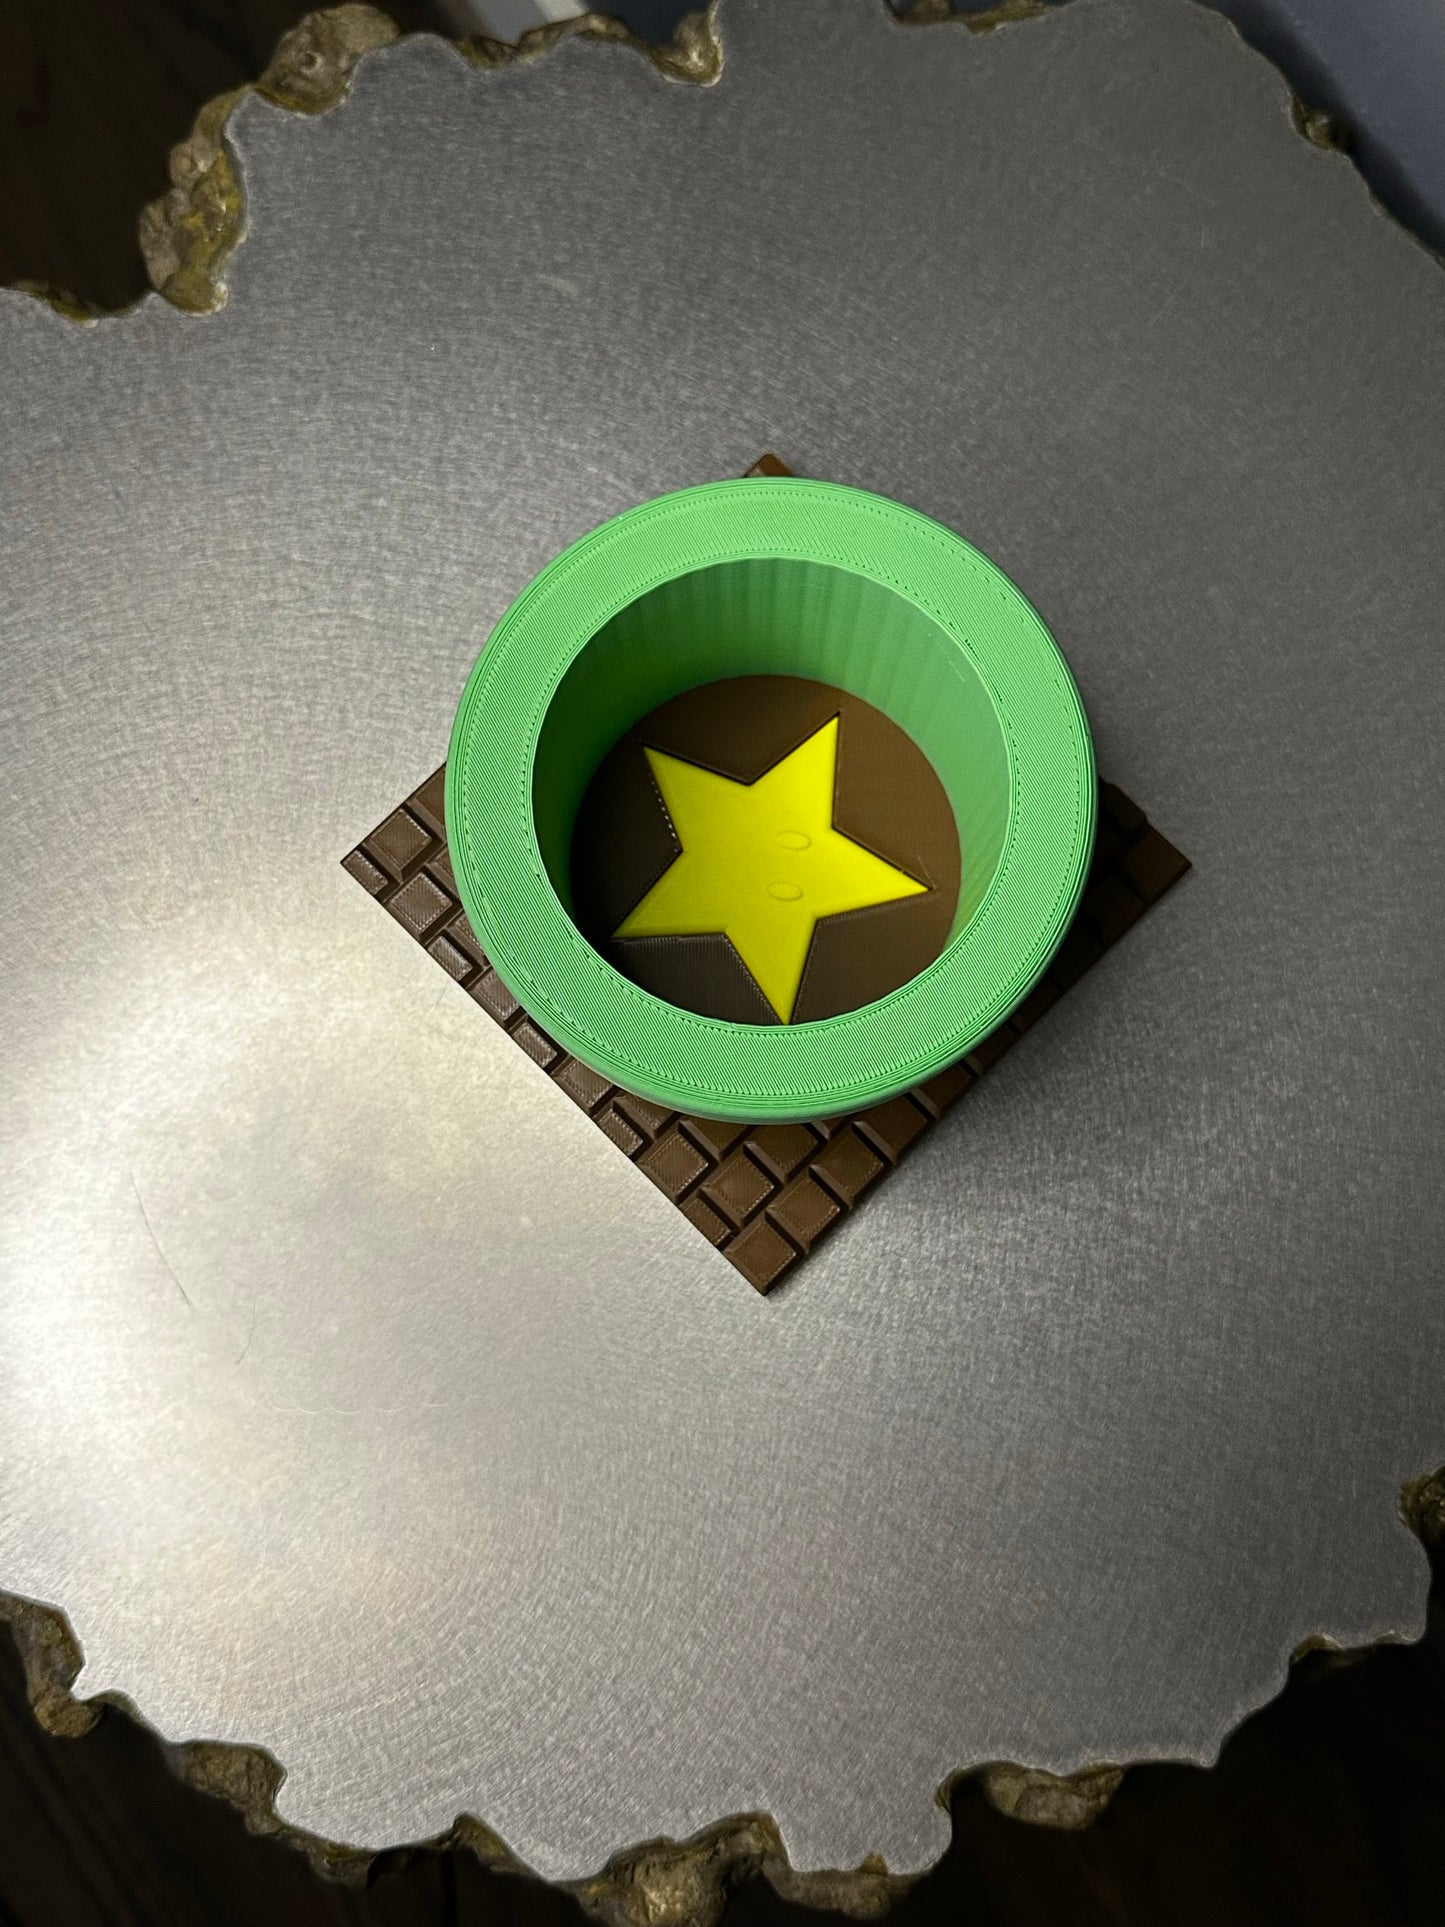 Coaster base comes with option of yellow star in middle or red piranha. This picture shows the yellow star variant.